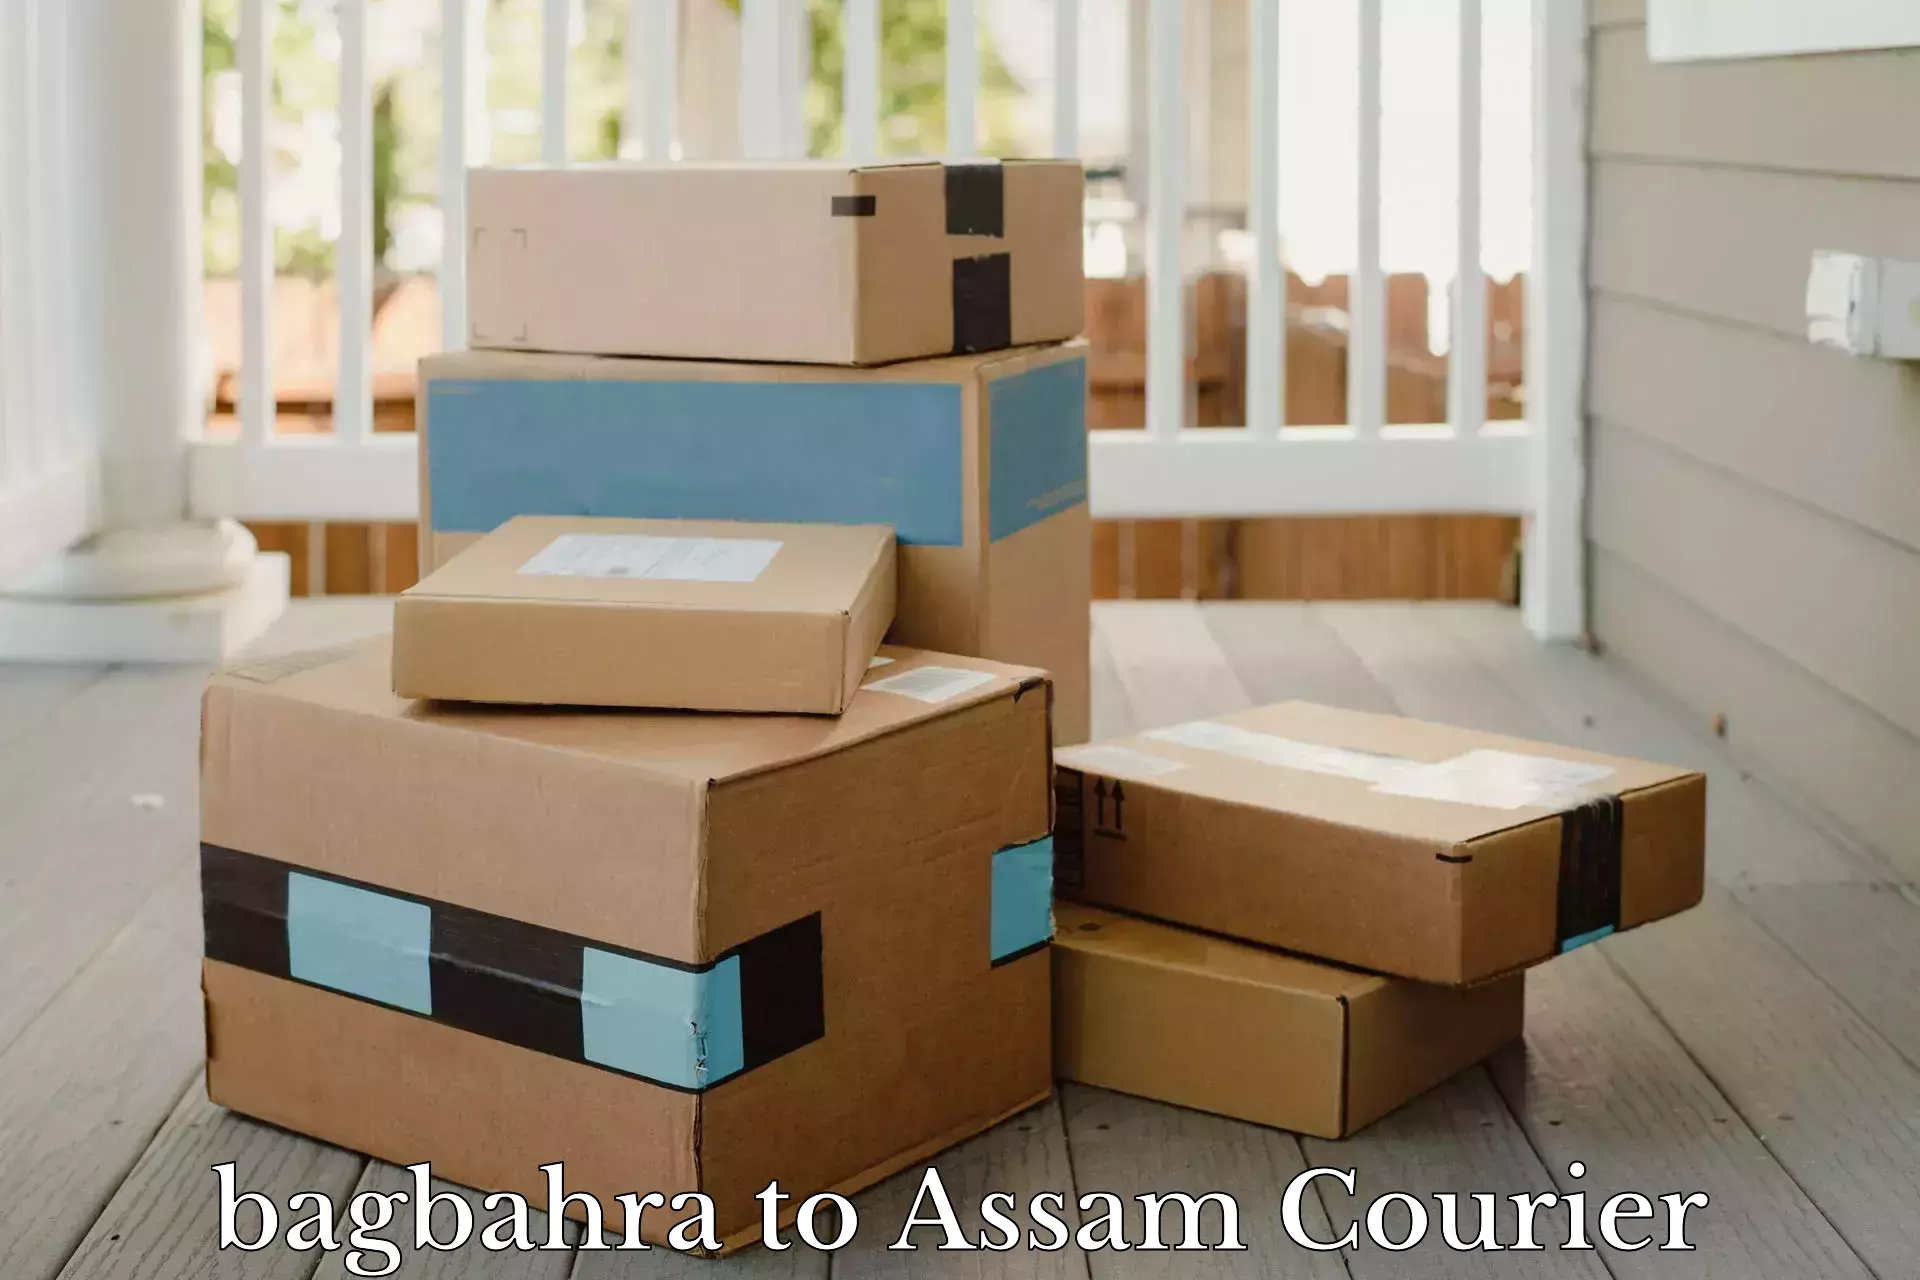 Express delivery network bagbahra to Assam